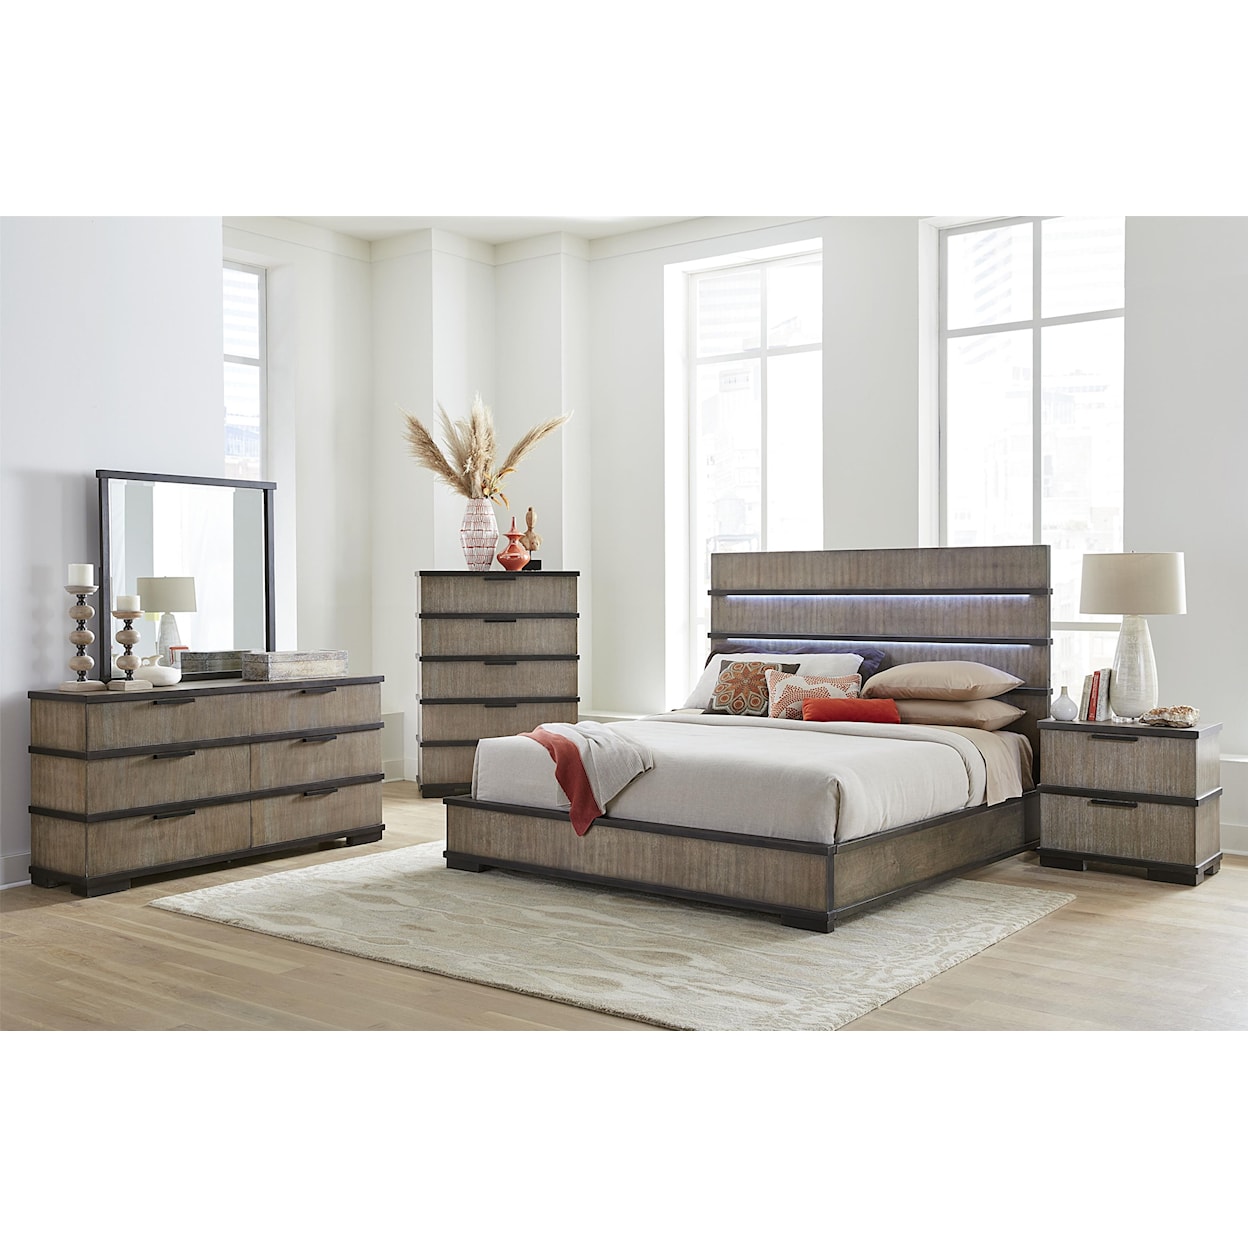 Lifestyle Mikala Queen 5 Pc Bedroom Group